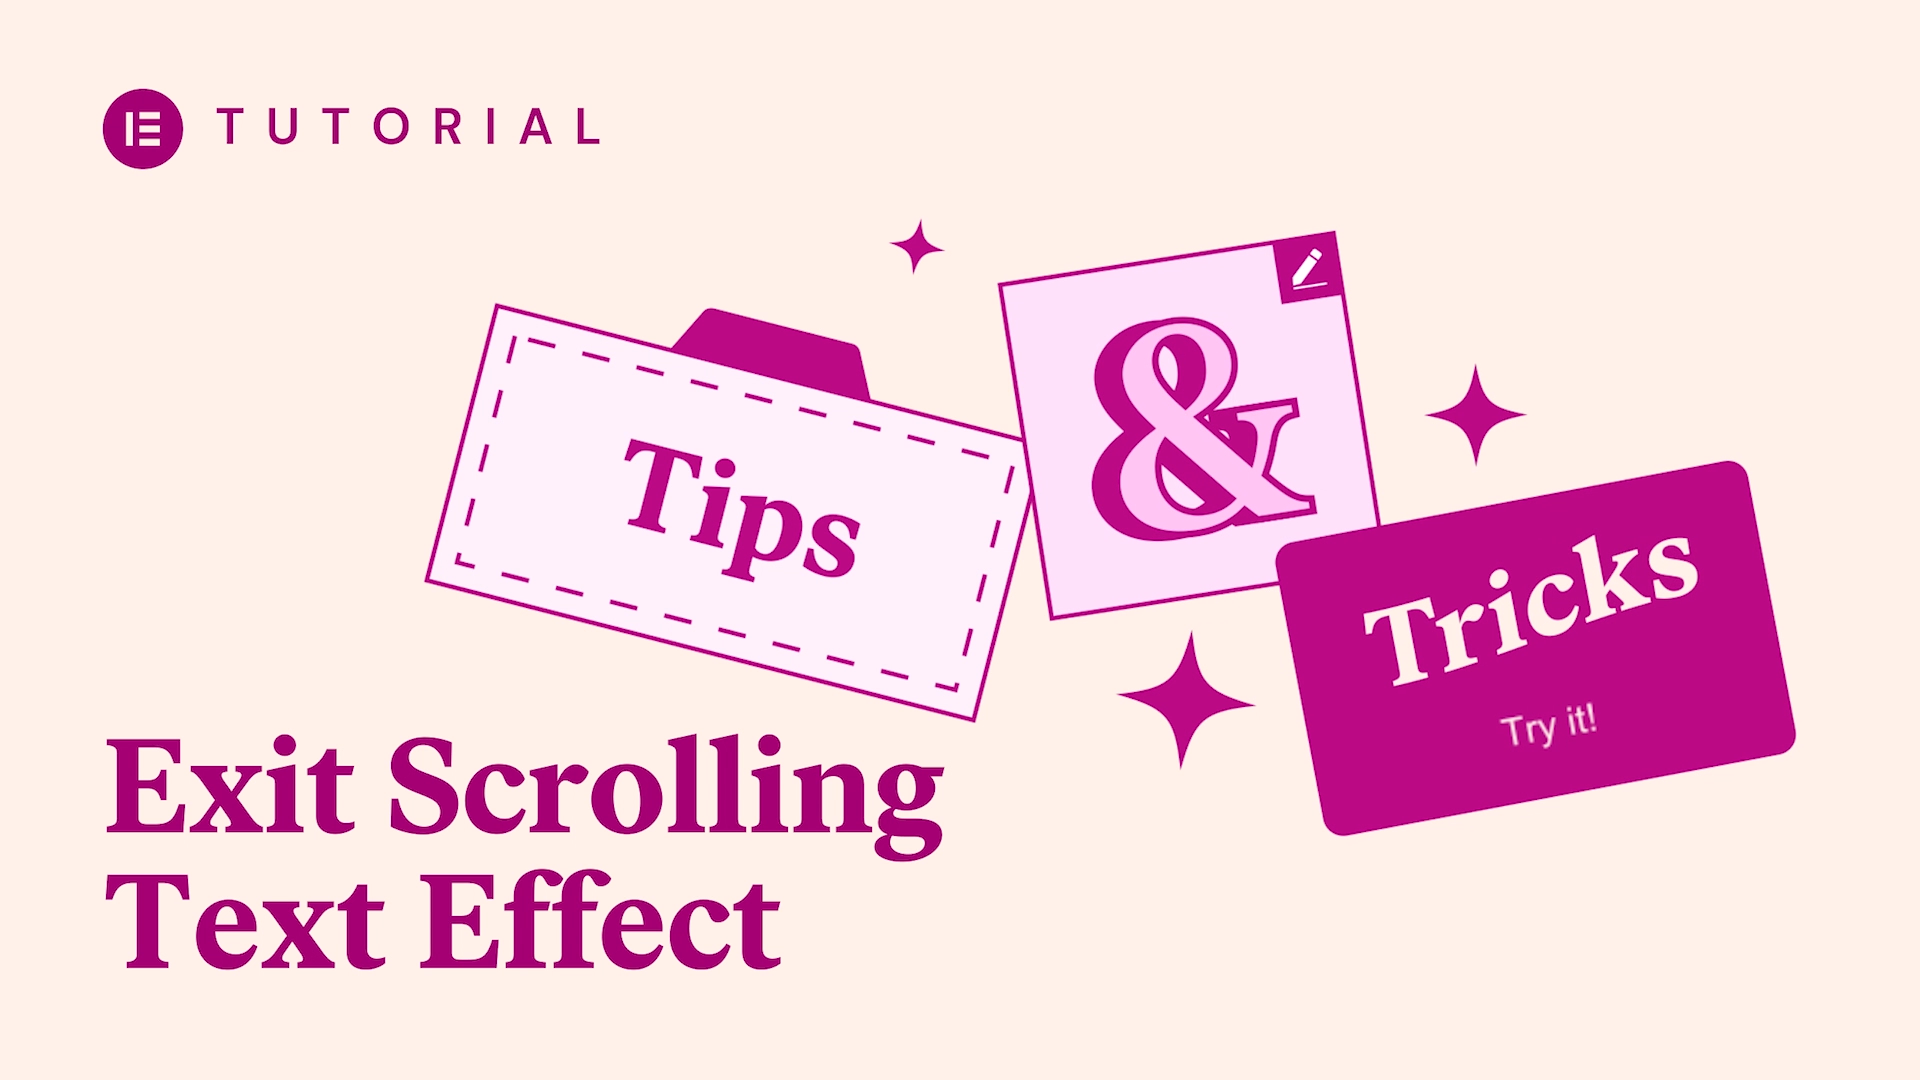 Create an Exit Scrolling Text Effect - Academy